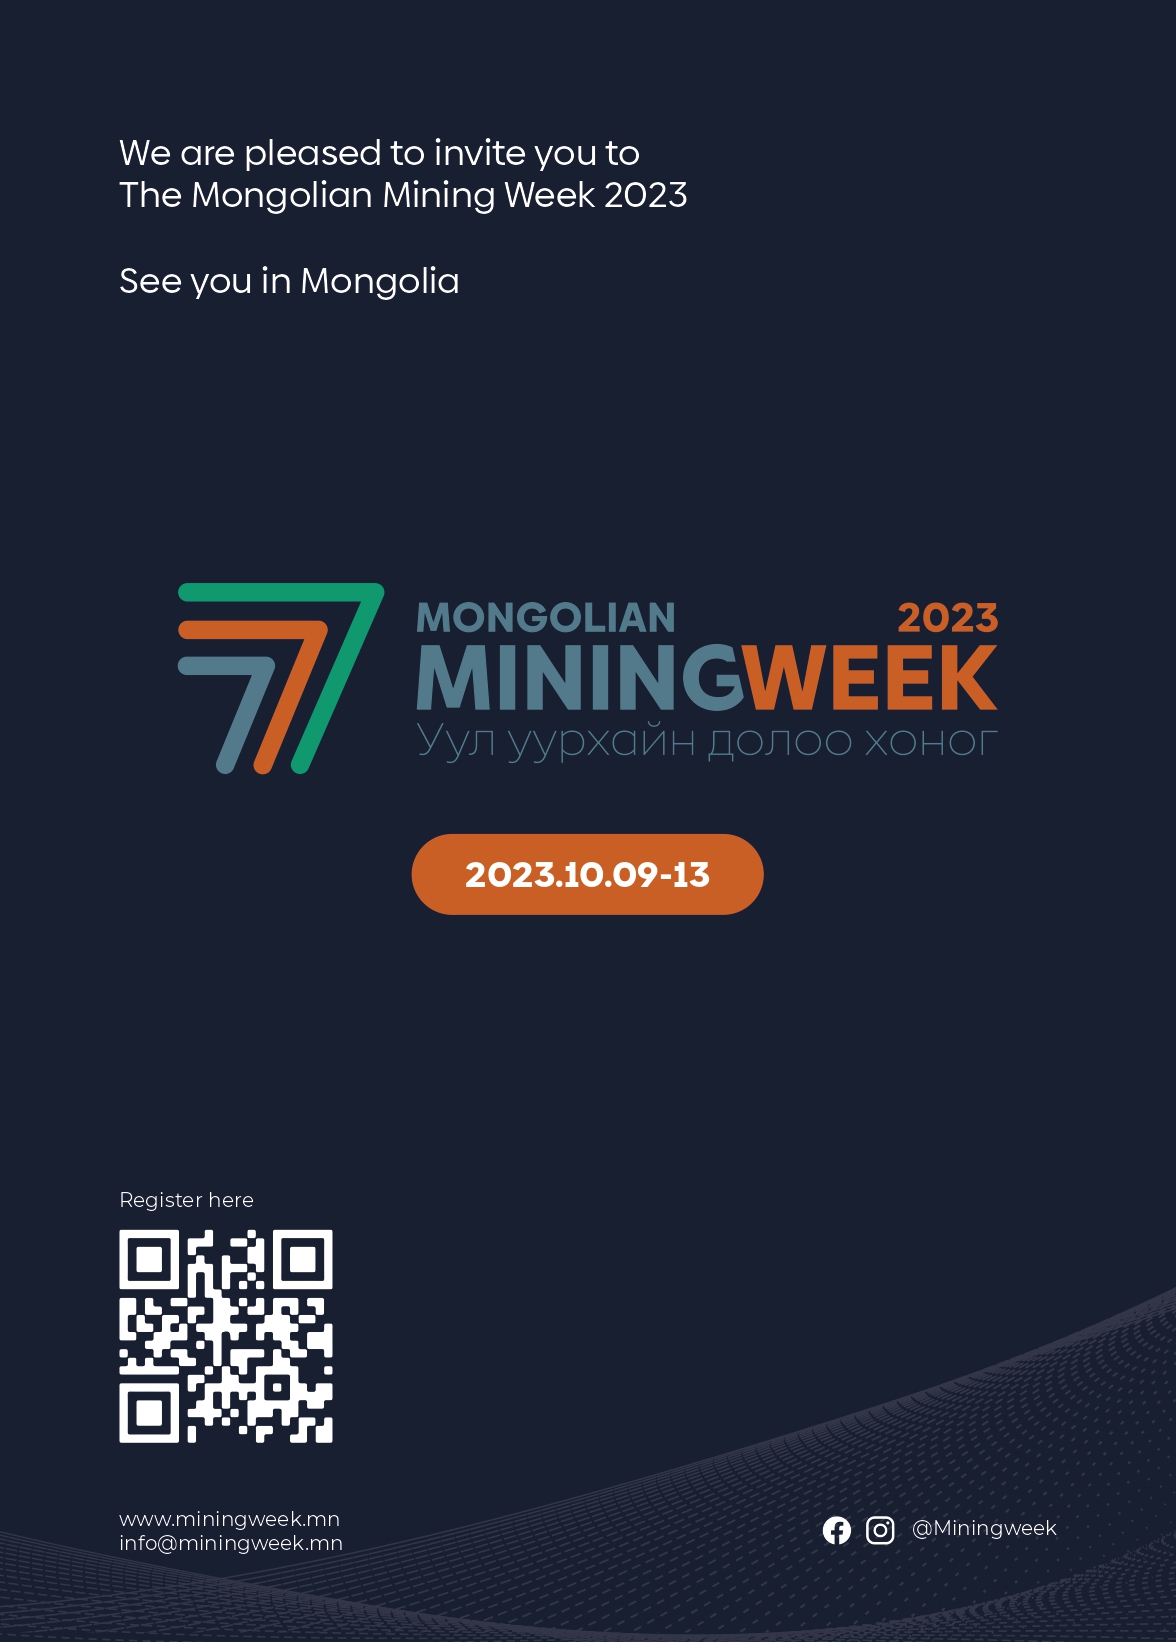 WE ARE PLEASED TO INVITE YOU TO THE MONGOLIAN MINING WEEK 2023